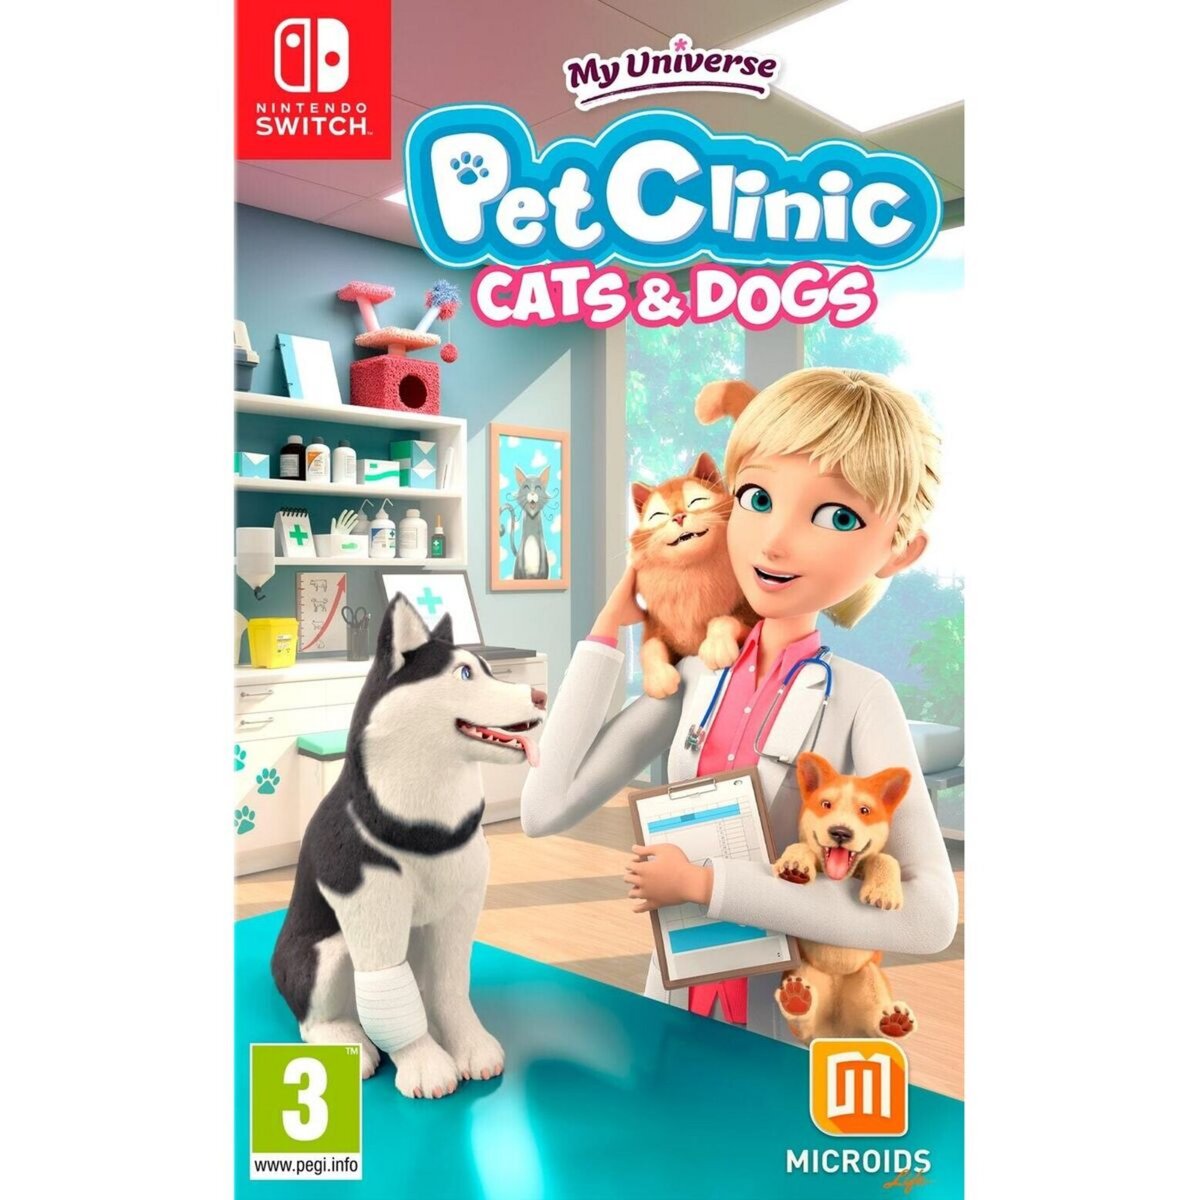 JUST FOR GAMES My Universe Pet Clinic Cats & Dogs Nintendo Switch